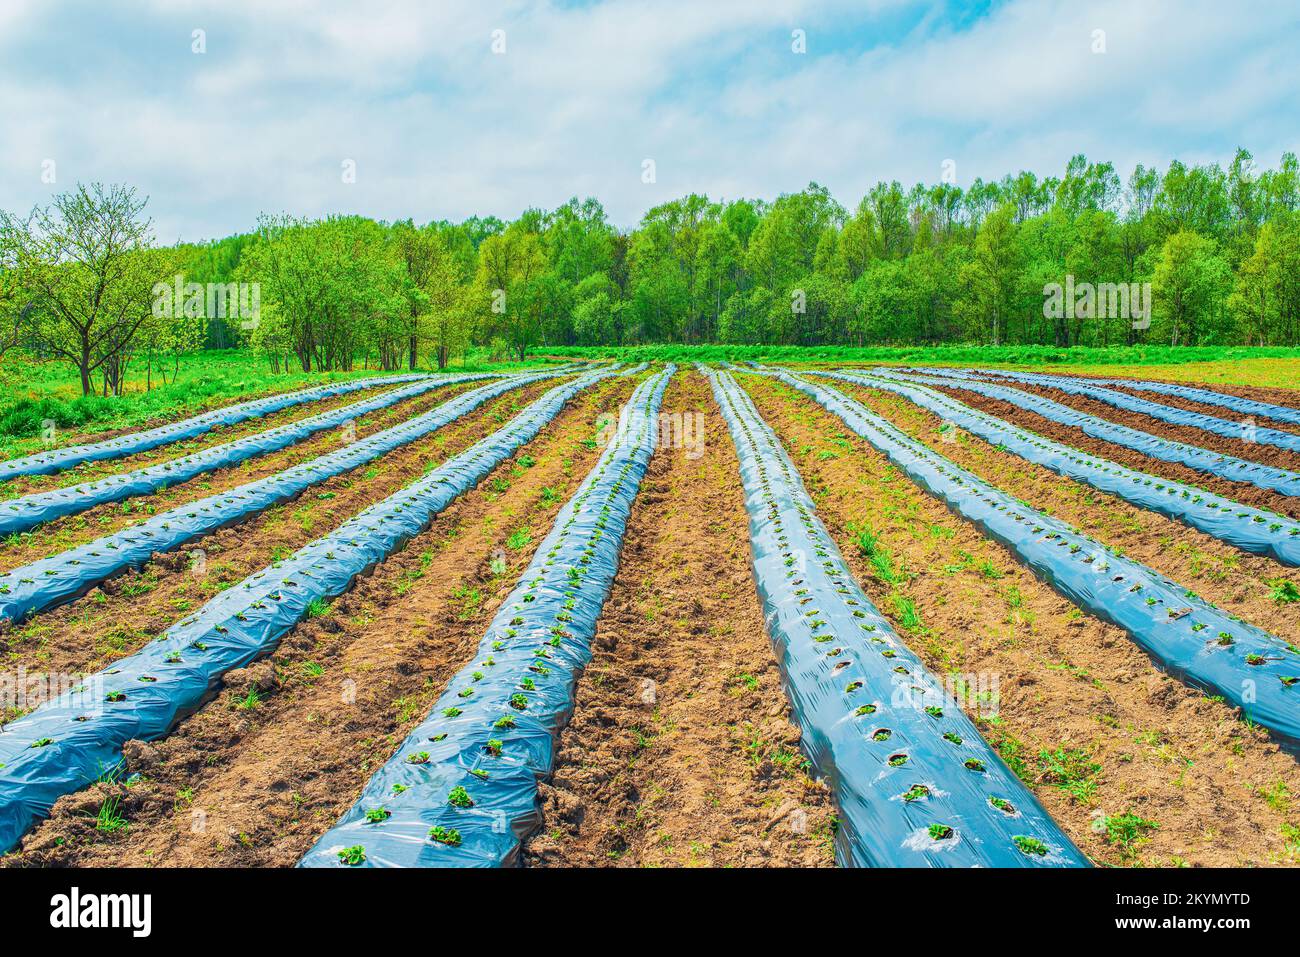 Rows of strawbery on ground covered by plastic mulch film in agriculture organic farming. Cultivation of berries and vegetables using mulching method Stock Photo